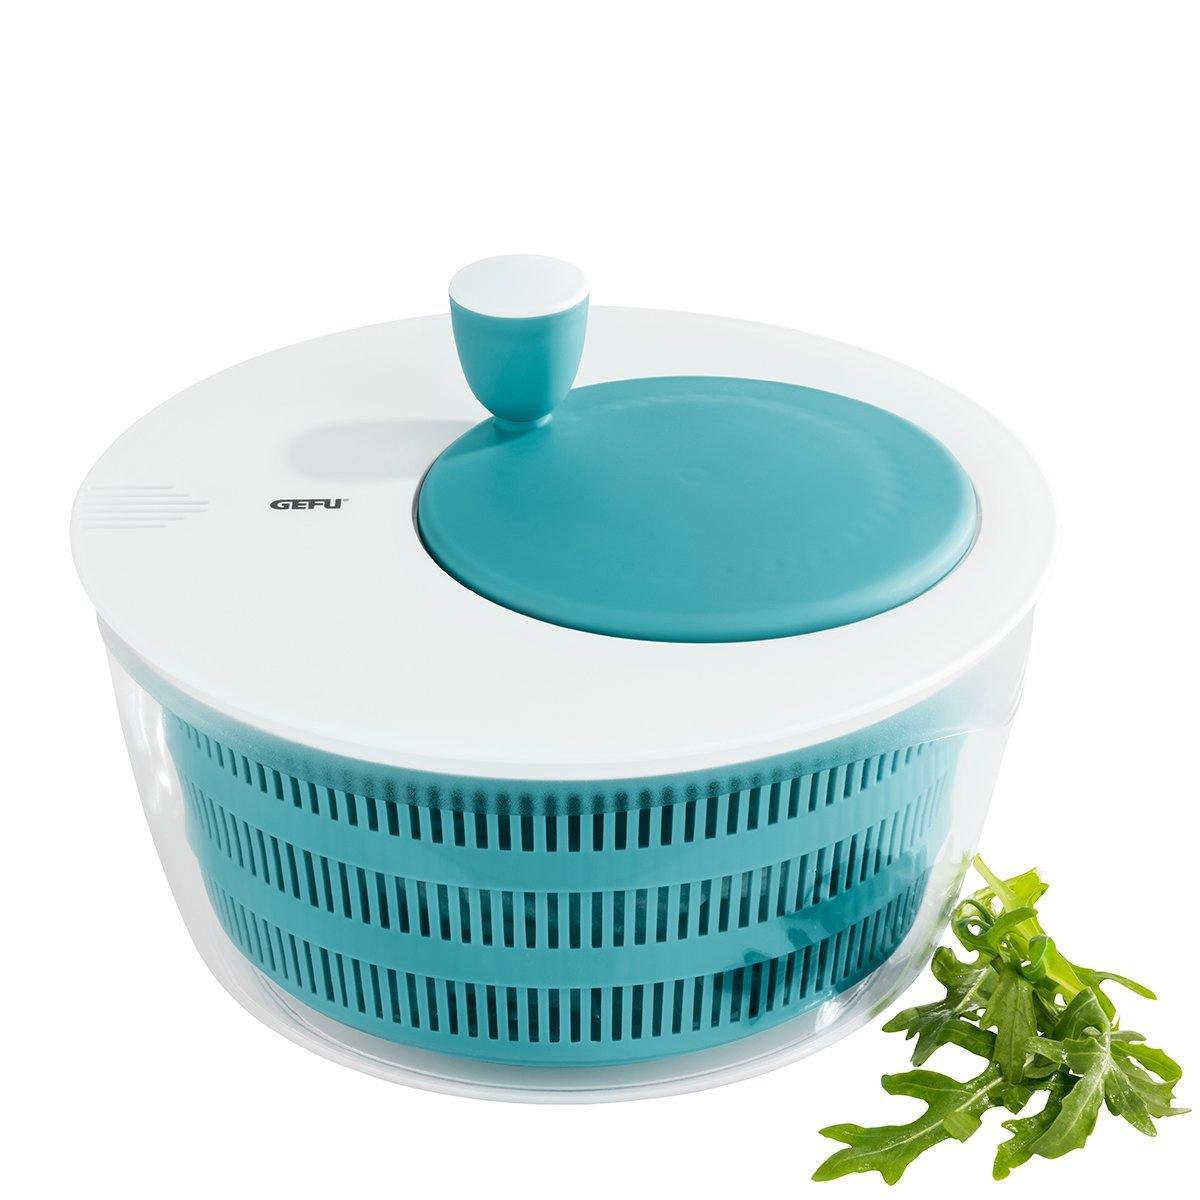 GEFU Salad Spinner Rotare, Azure Blue - Whole and All